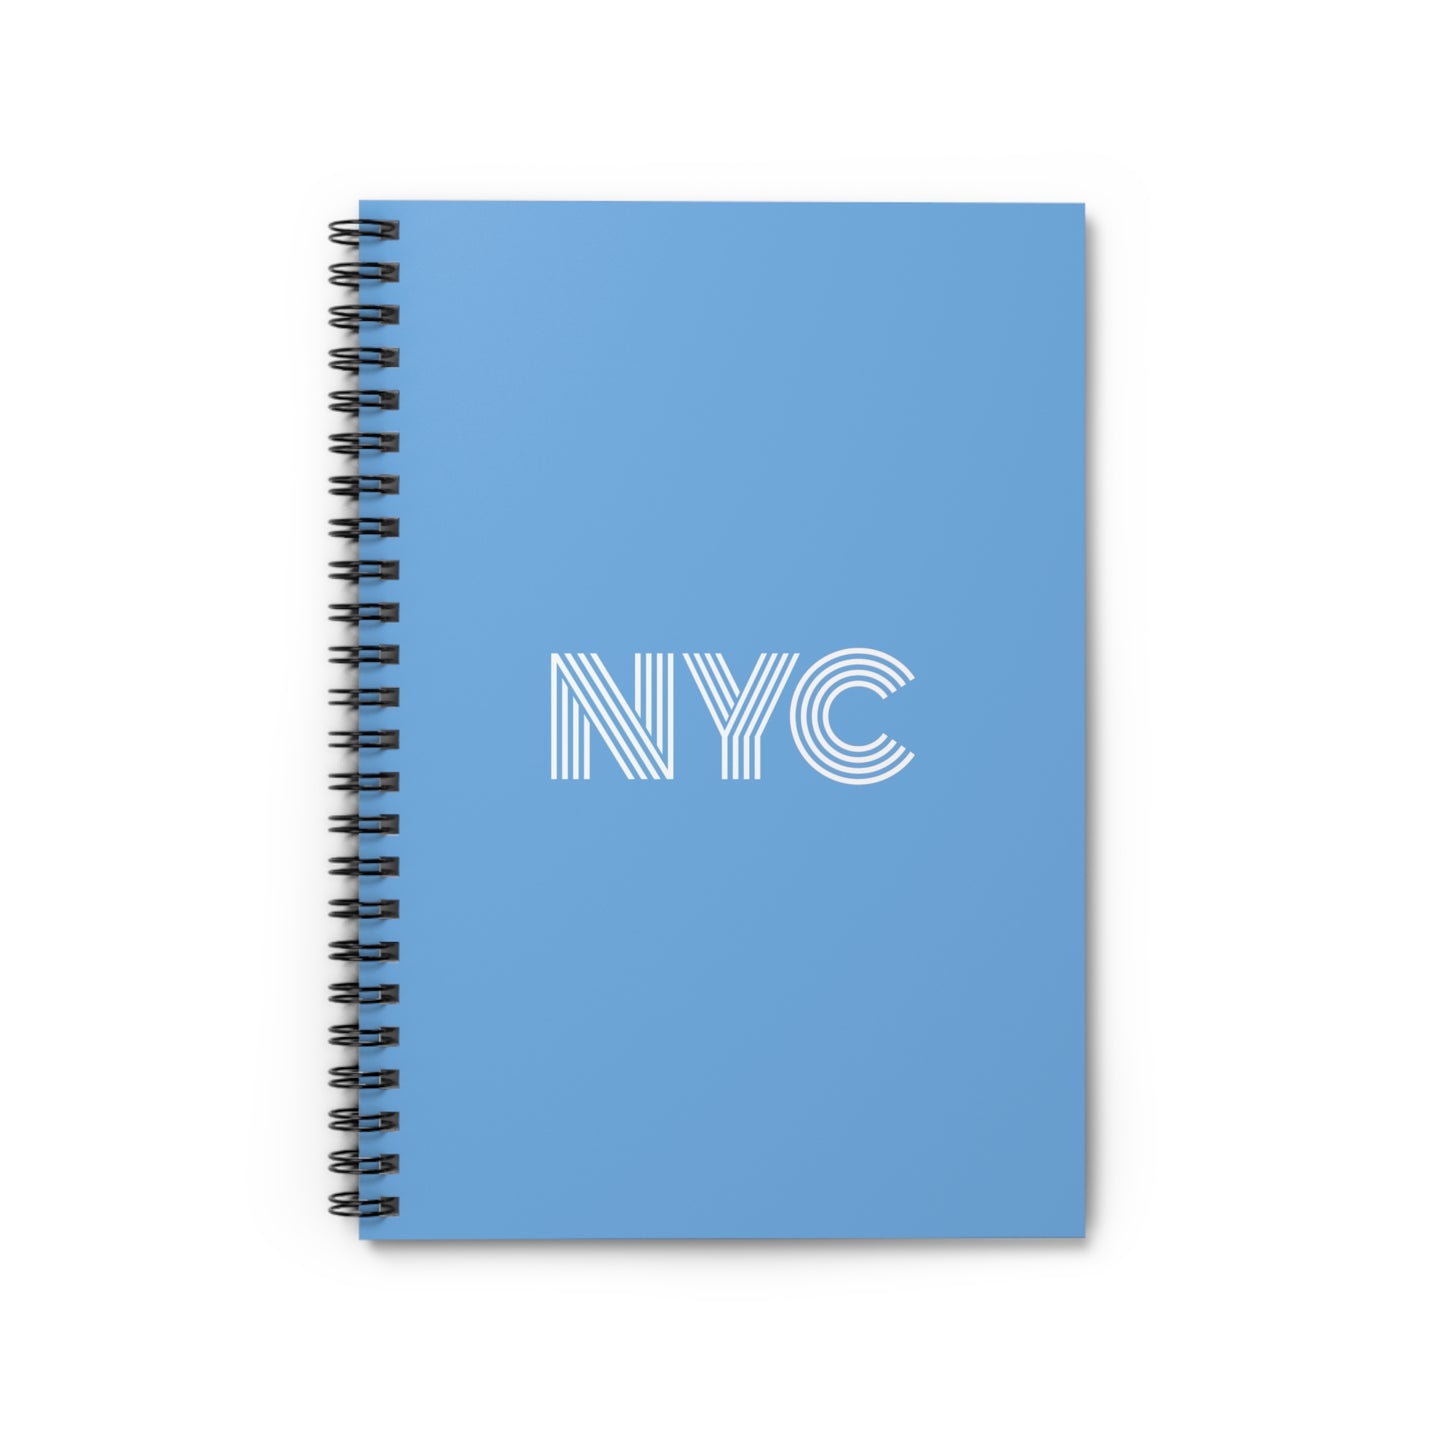 NYC, Spiral Notebook, Ruled Line